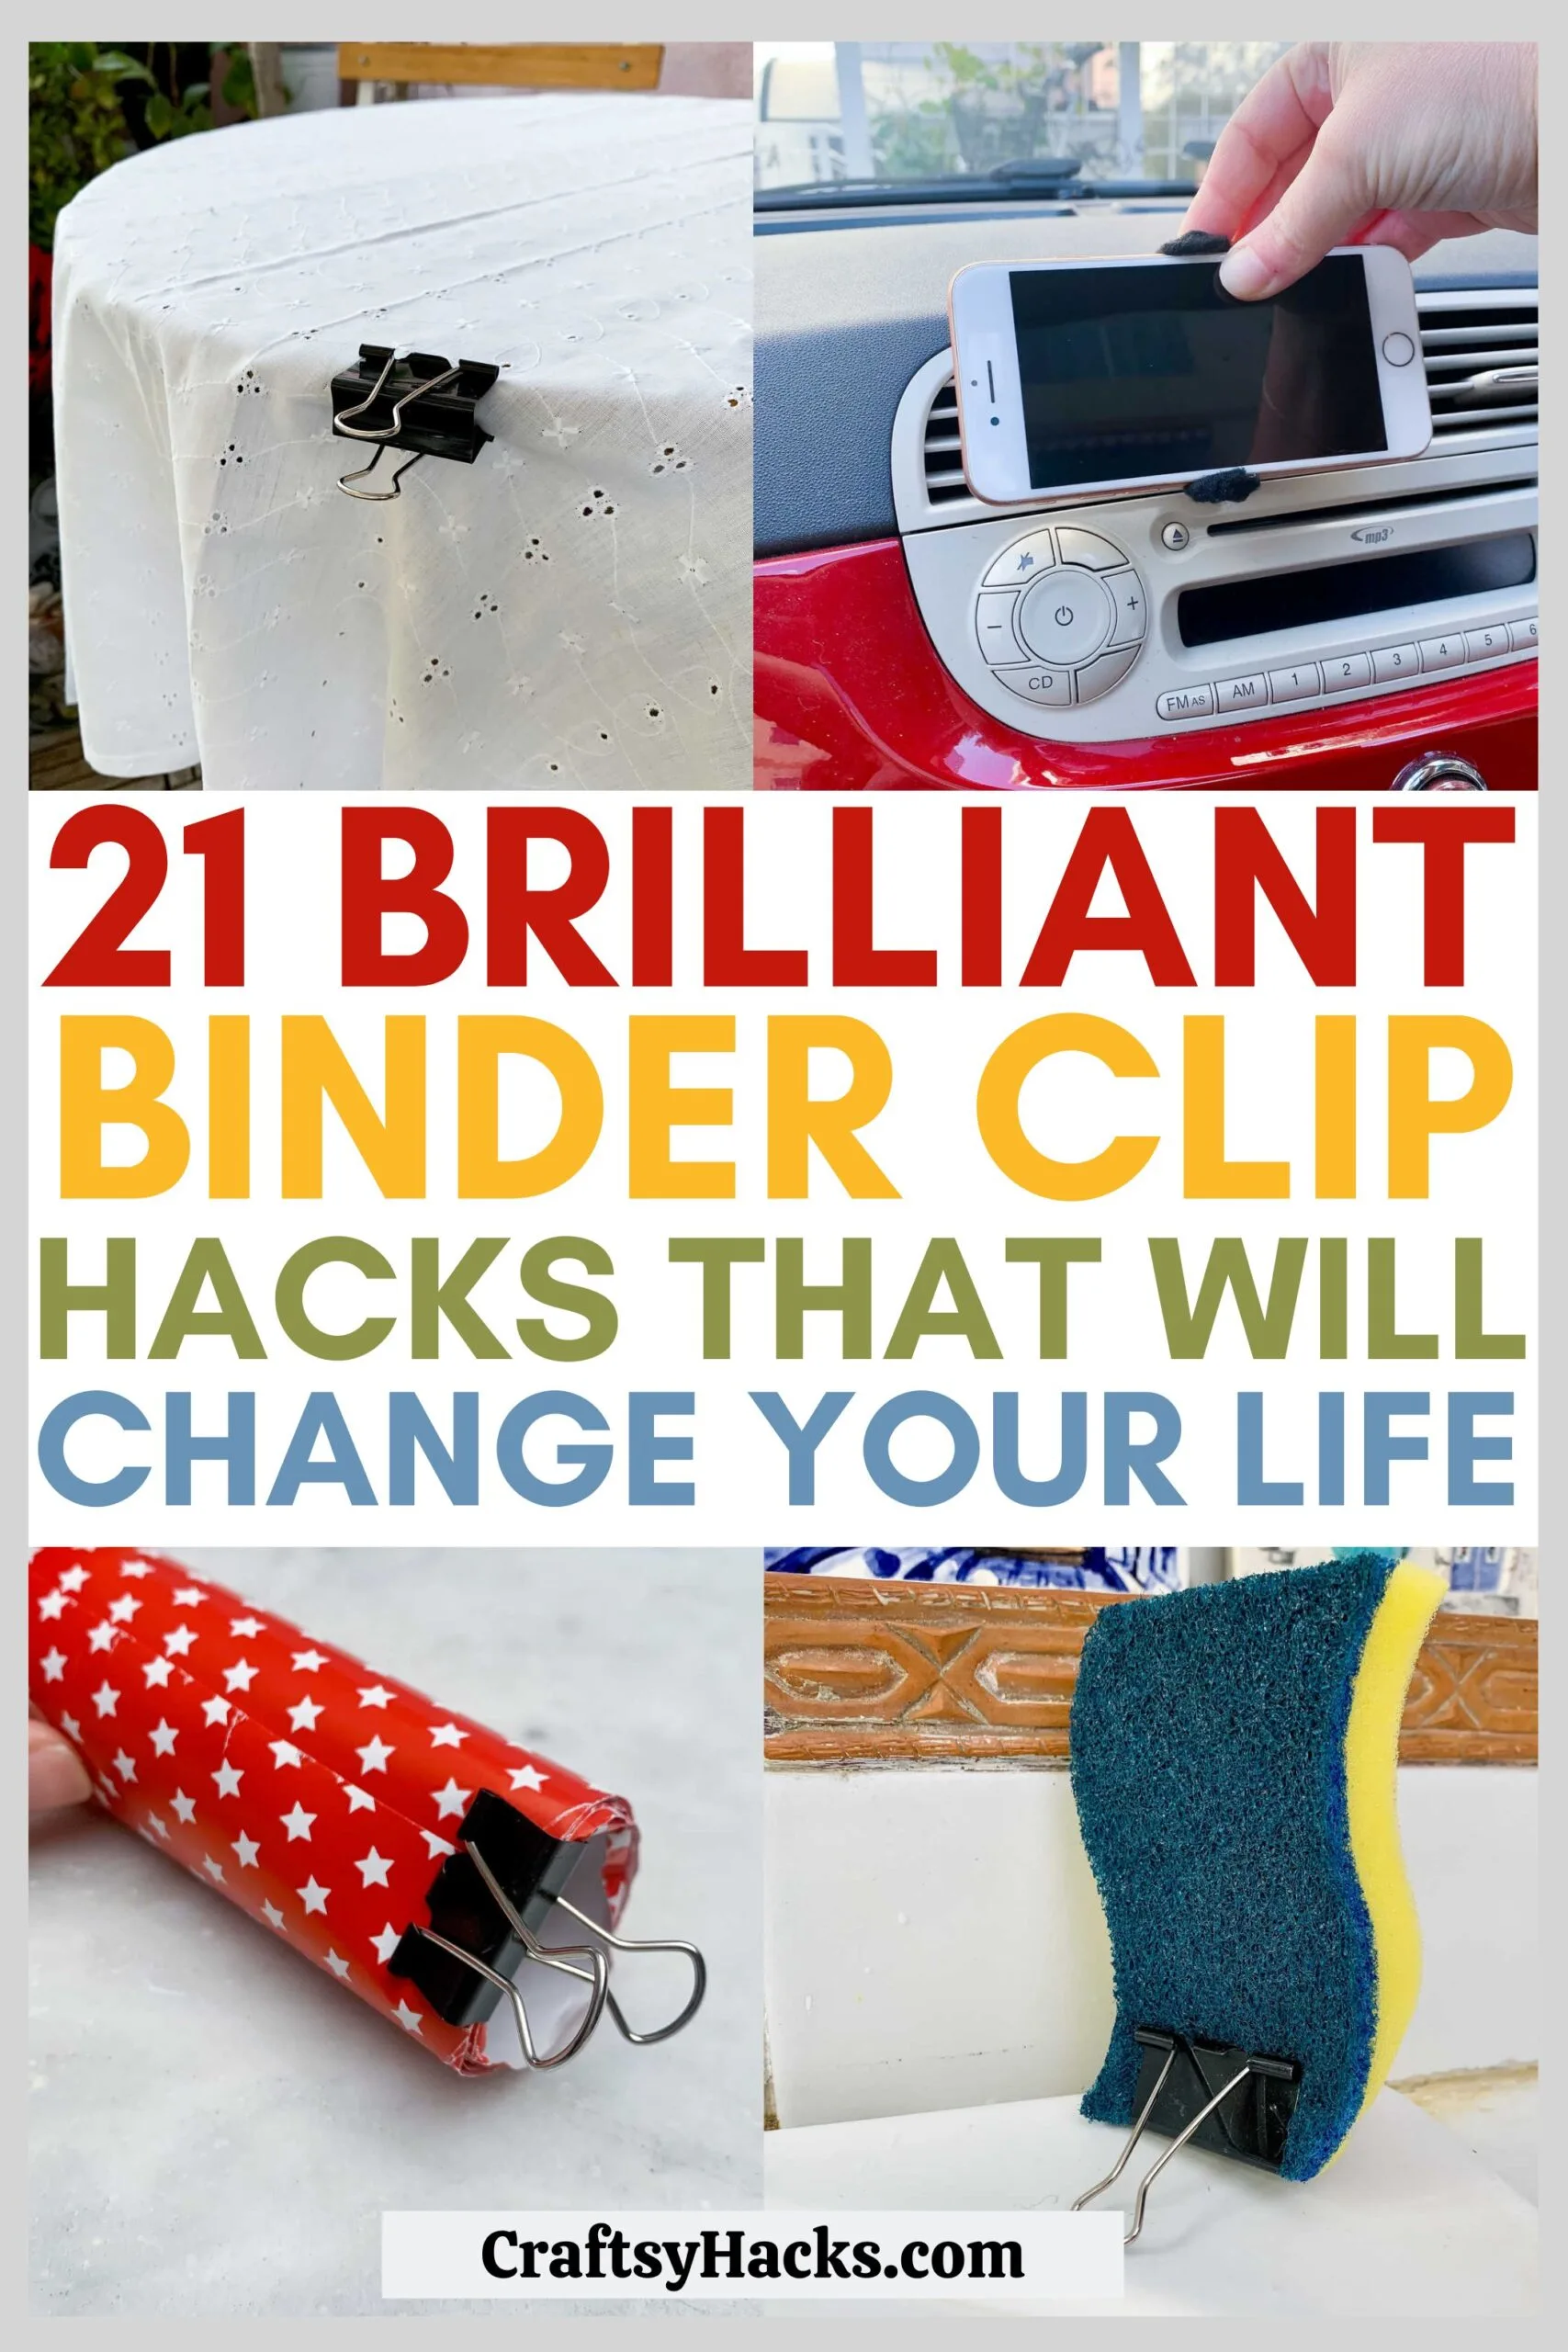 21 Brilliant Binder Clip Hacks All Teachers Need to Try - We Are